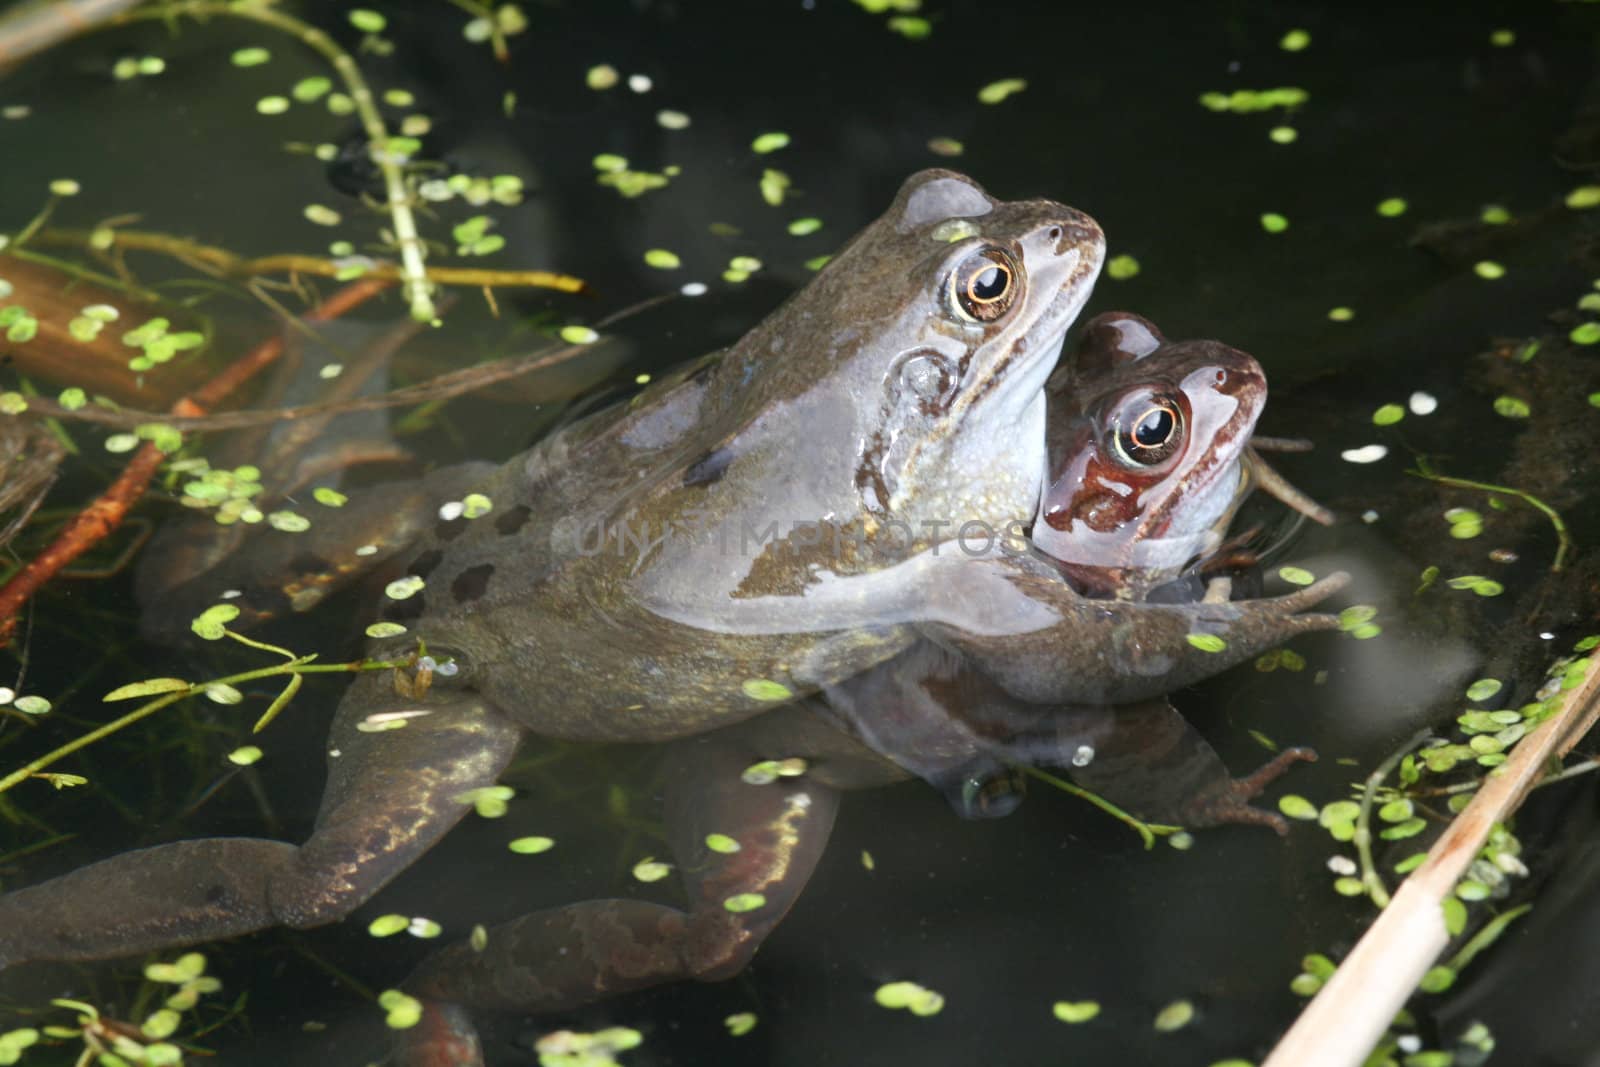 Pair of common frogs, Rana temporaria, mating in a pond.